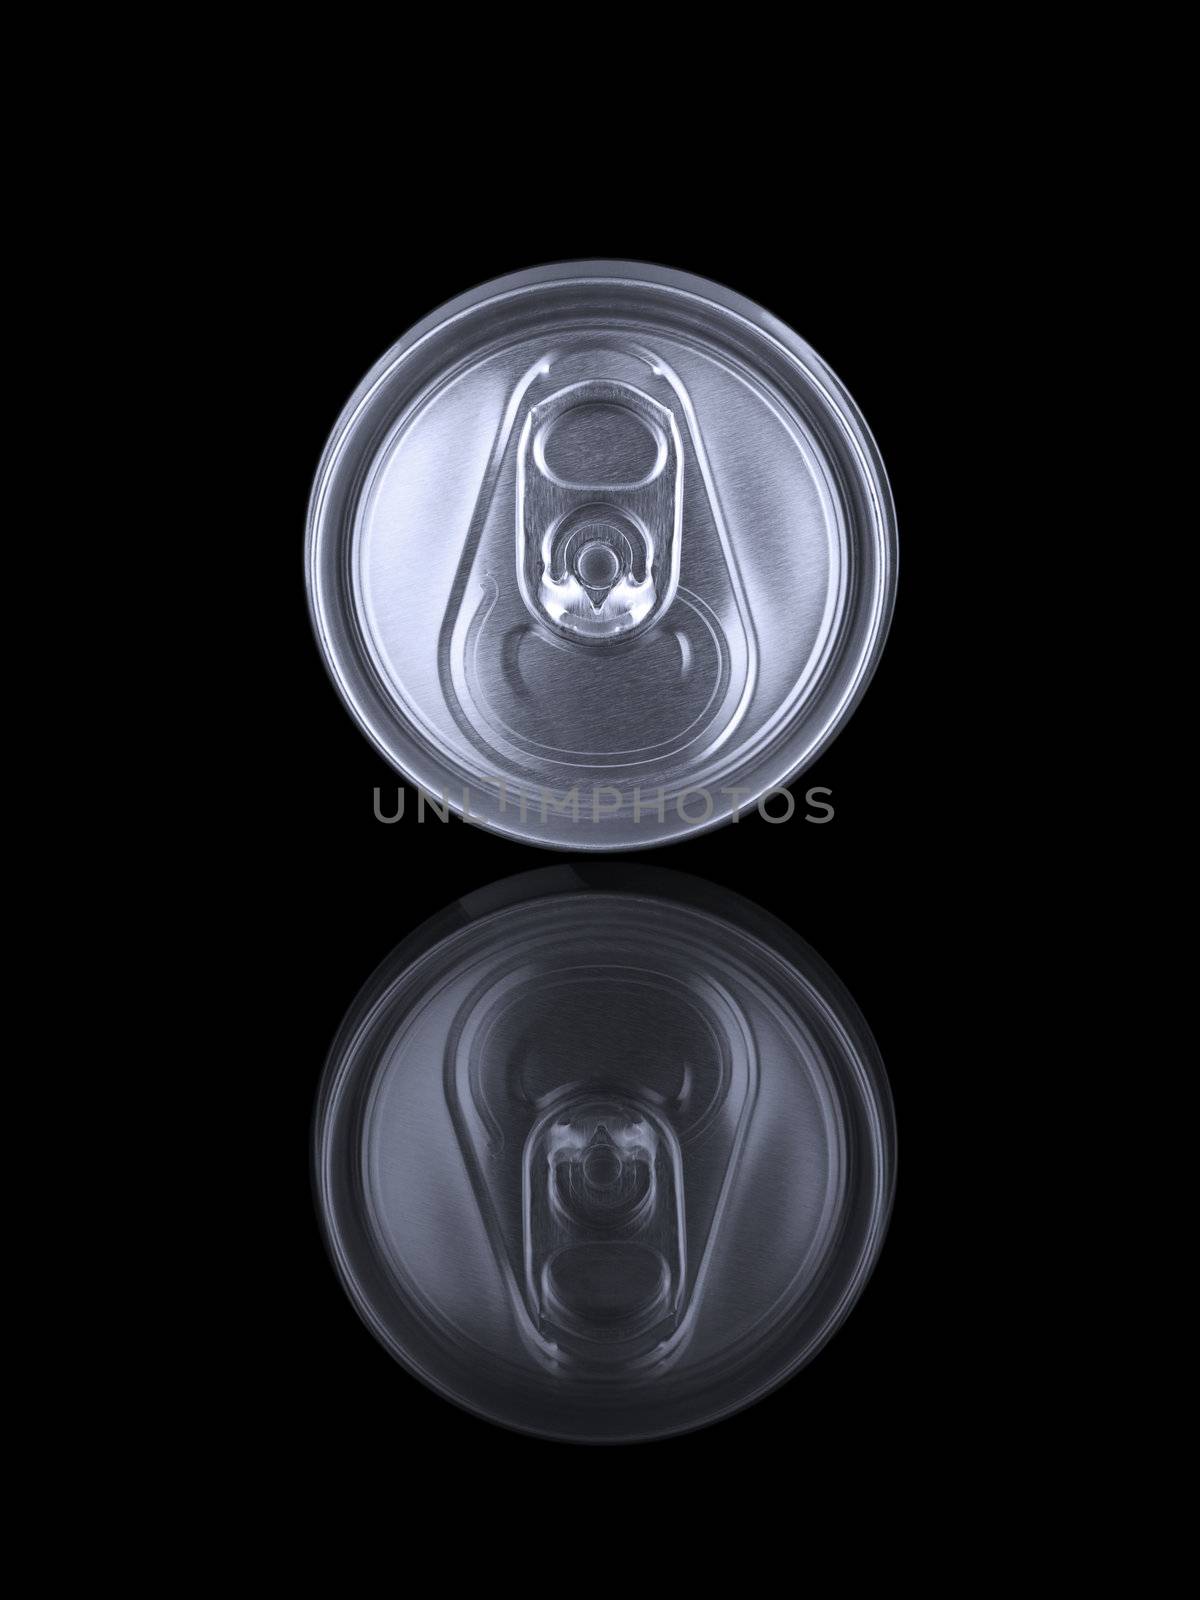 A beverage can and its reflection isolated on black.